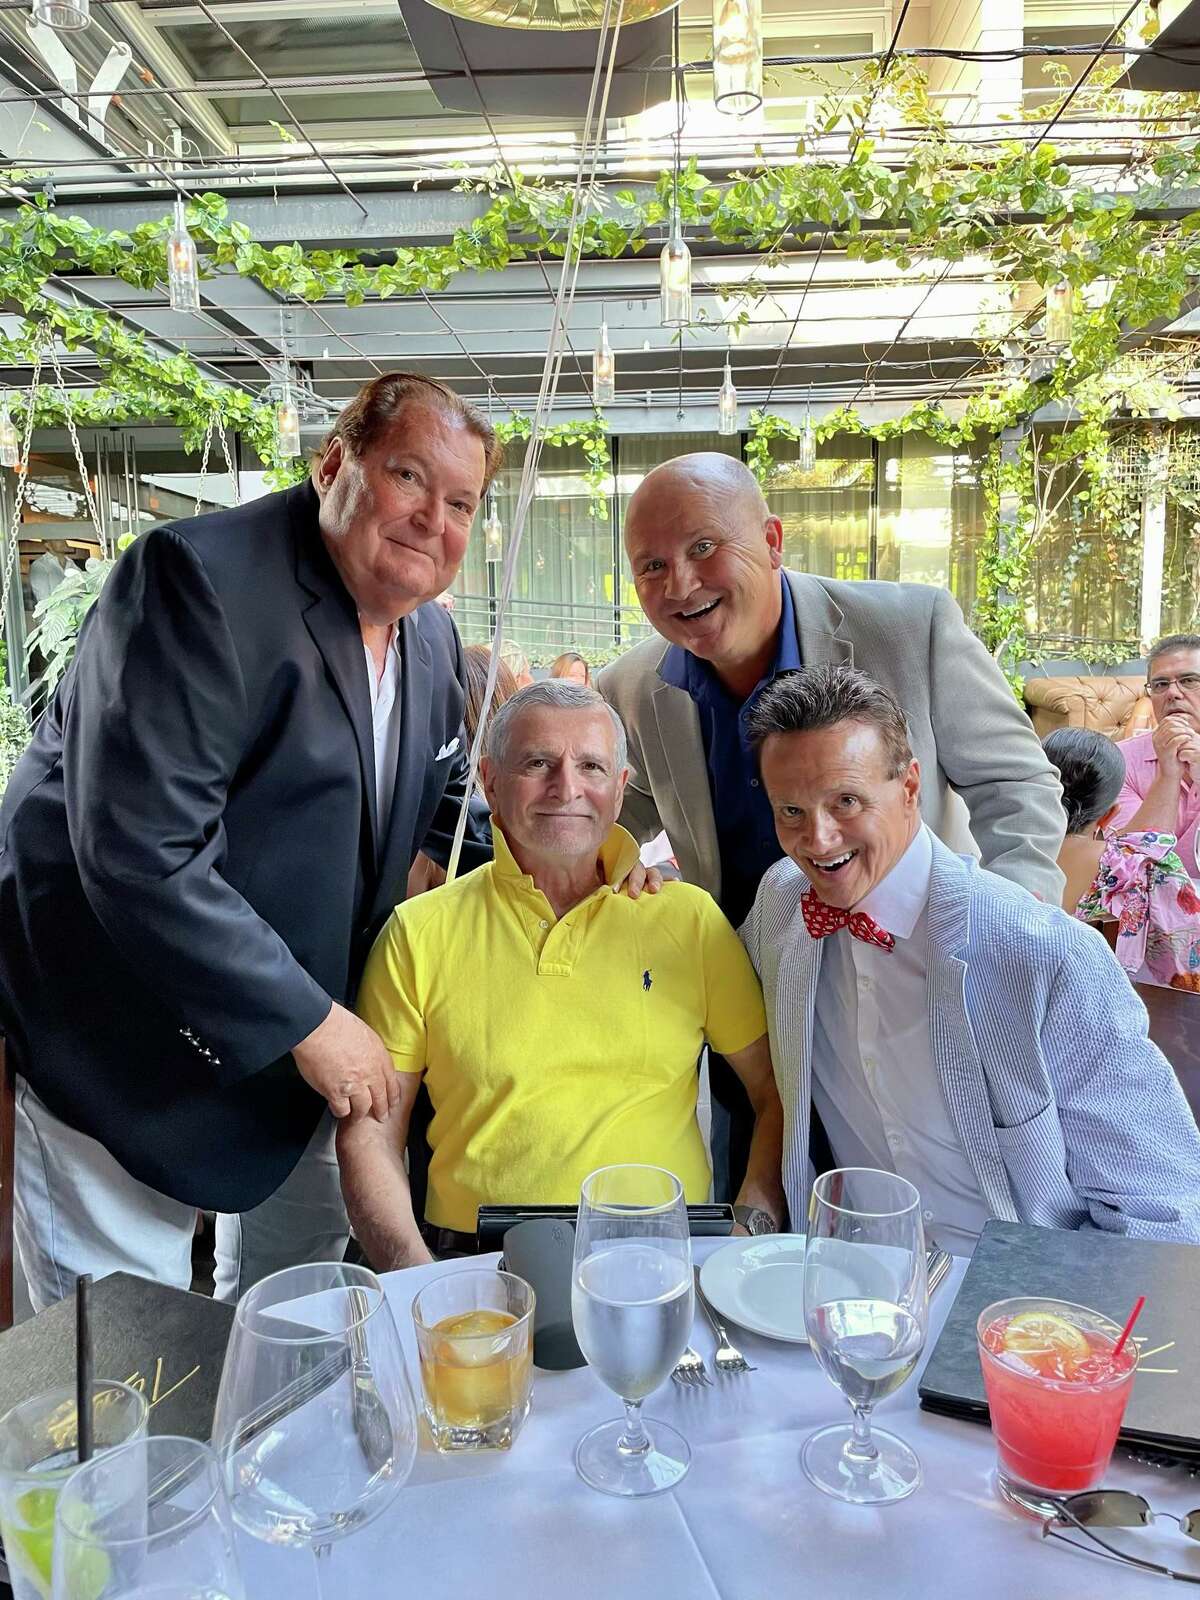 Dr. Leo Donovan of Stamford, center, celebrates his 80th birthday at Tony’s at the J House in Riverside on July 30 with his former colleagues, Dr. Lou Tufano, right, of Hamden and Dr. Jay Berkowitz, left, of Milford and Tony Capasso, back right.